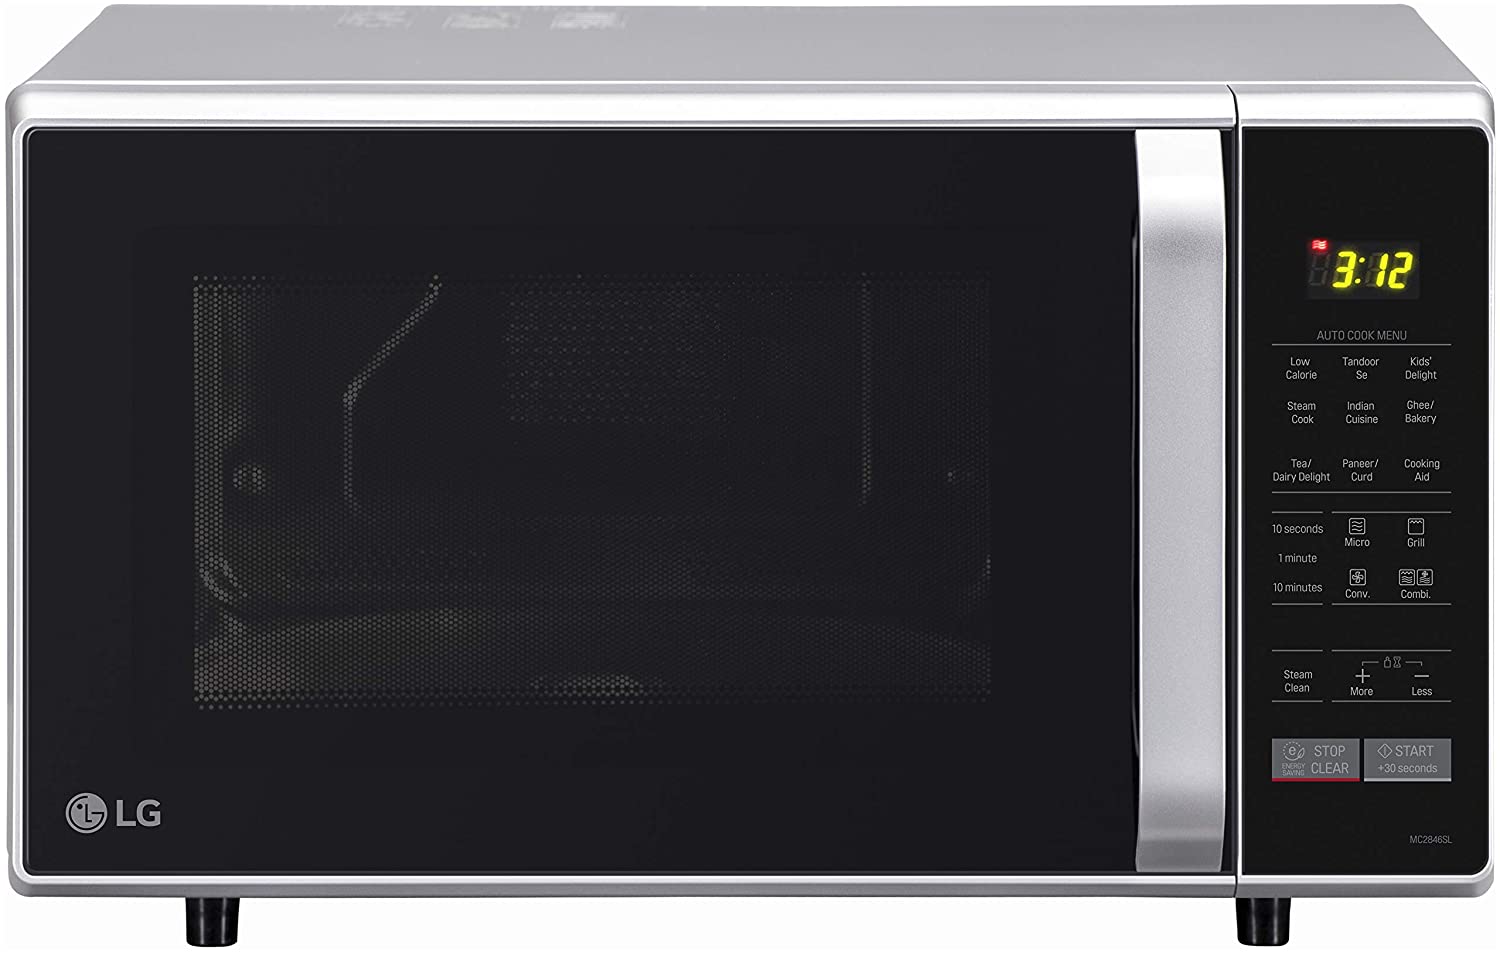 Best LG Microwave Oven In India